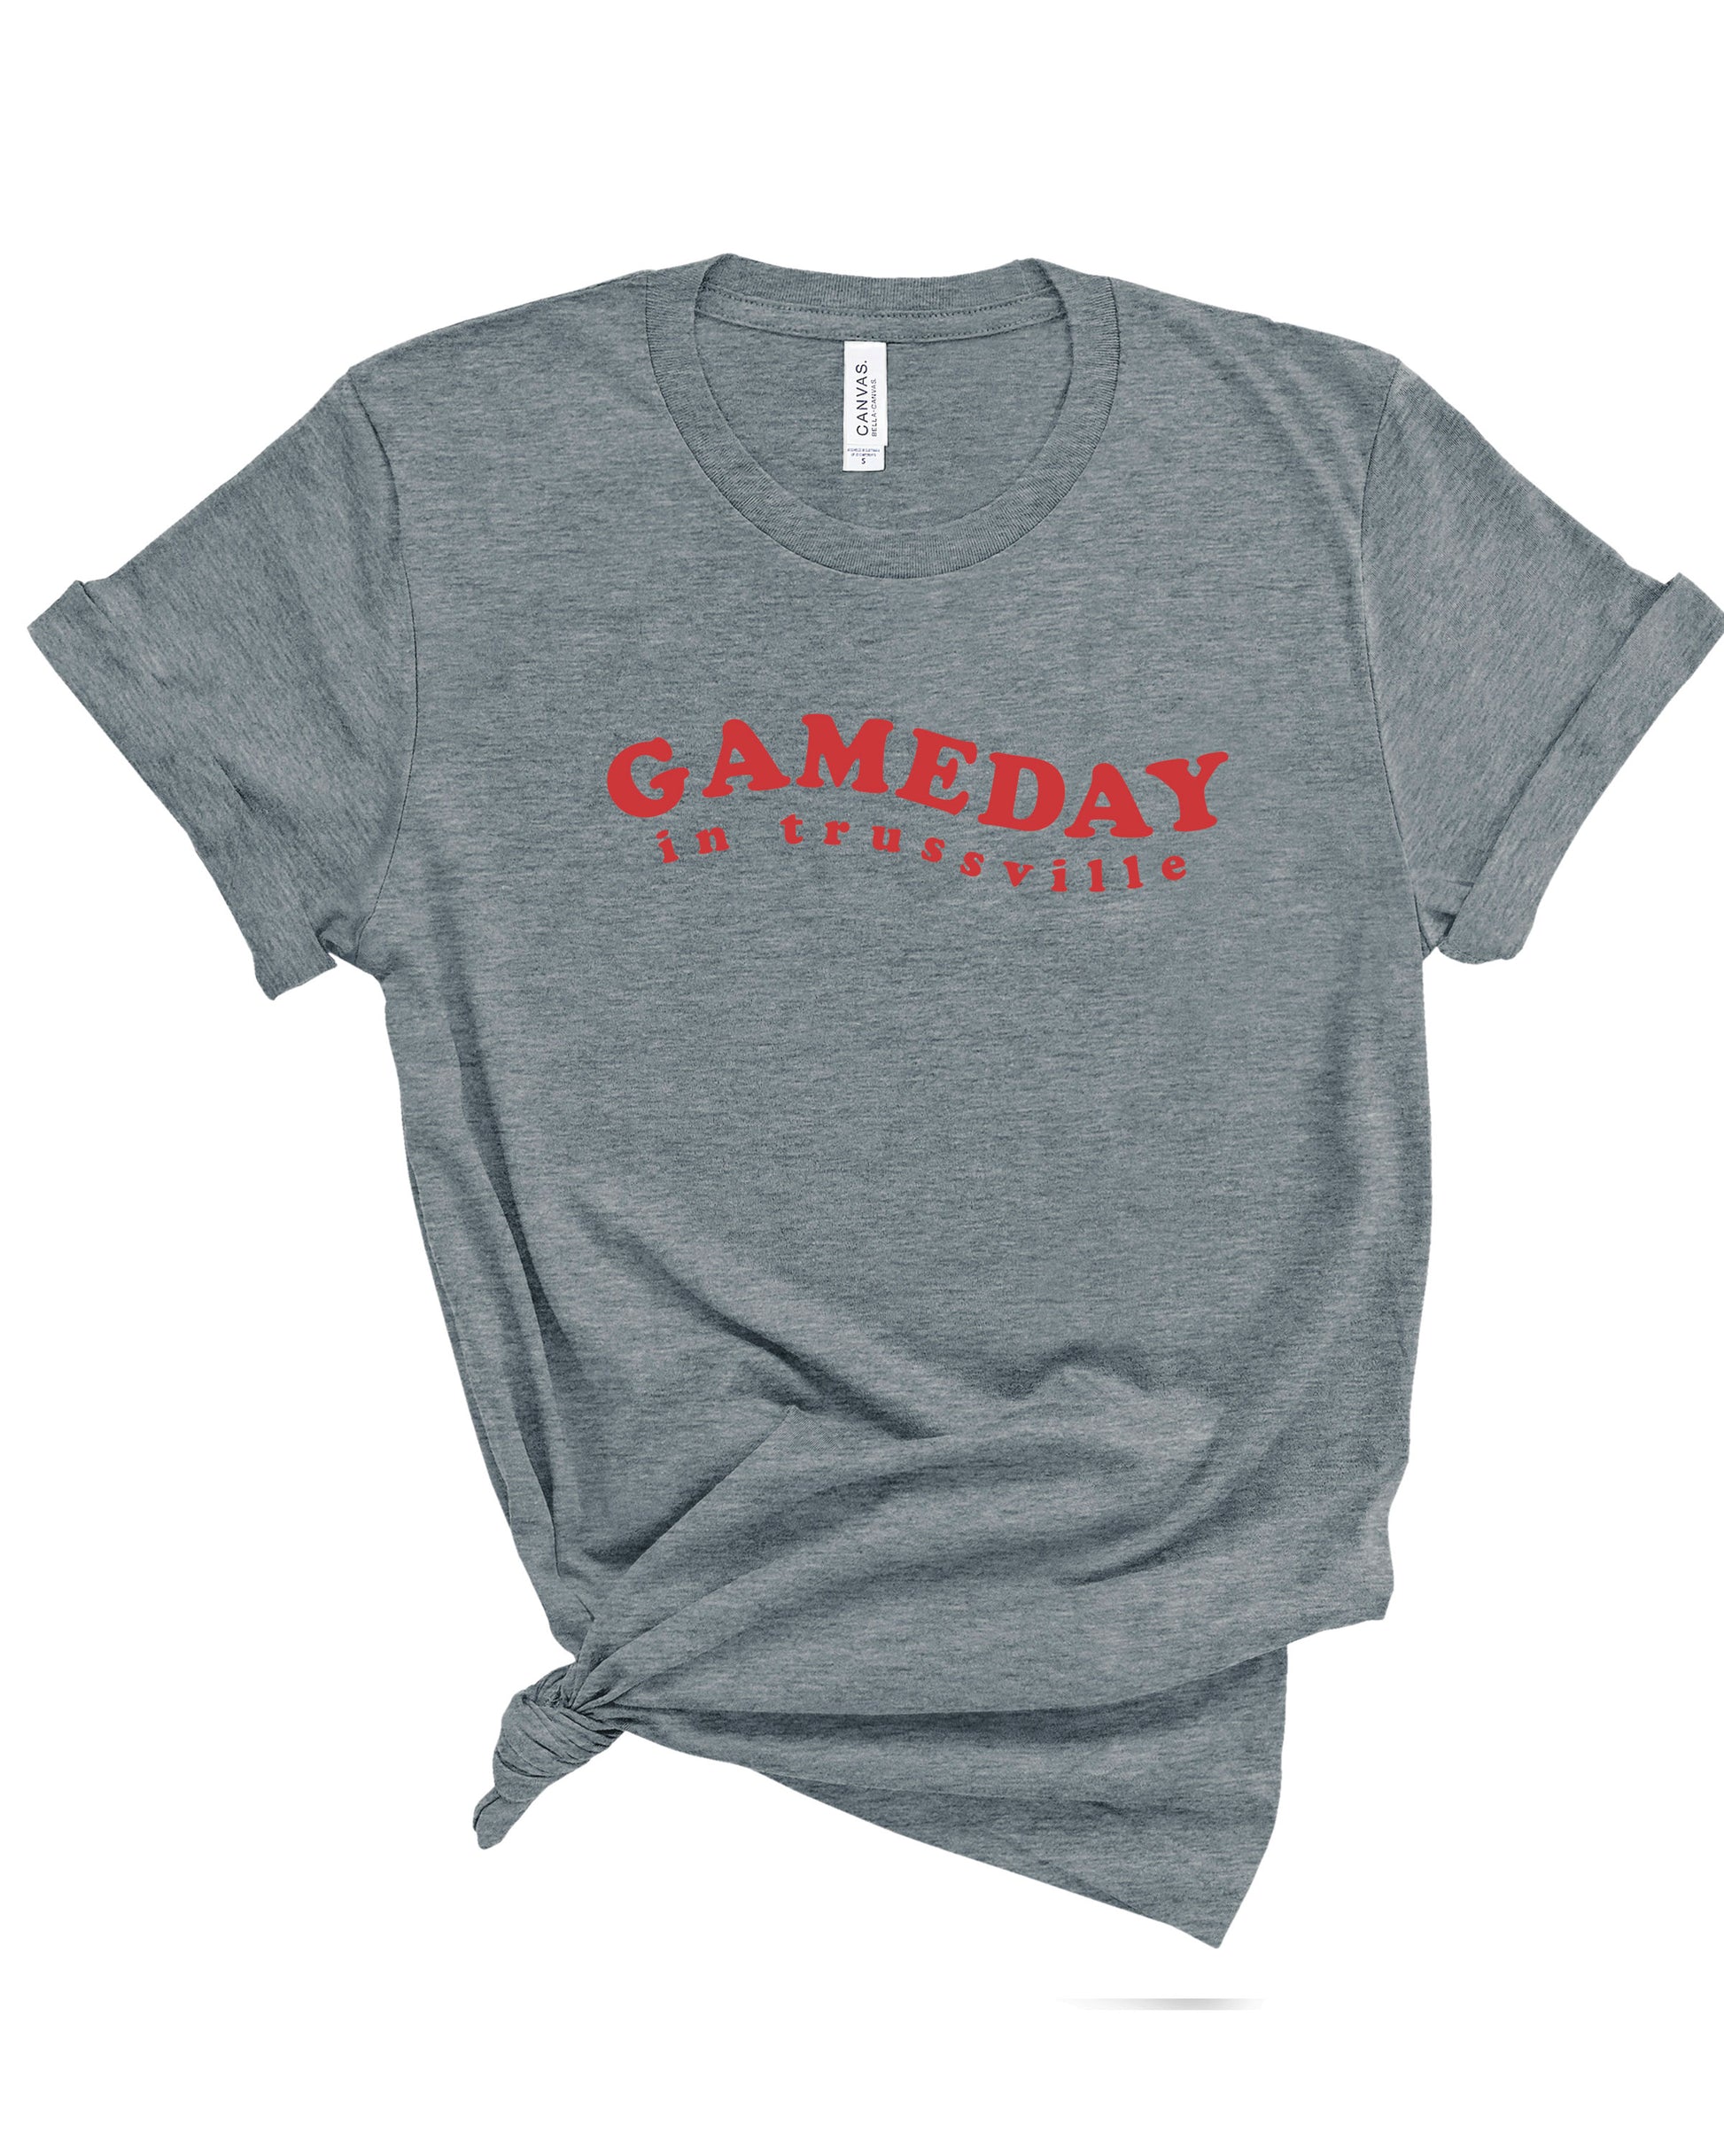 Gameday in Trussville | Adult Tee-Adult Tee-Sister Shirts-Sister Shirts, Cute & Custom Tees for Mama & Littles in Trussville, Alabama.